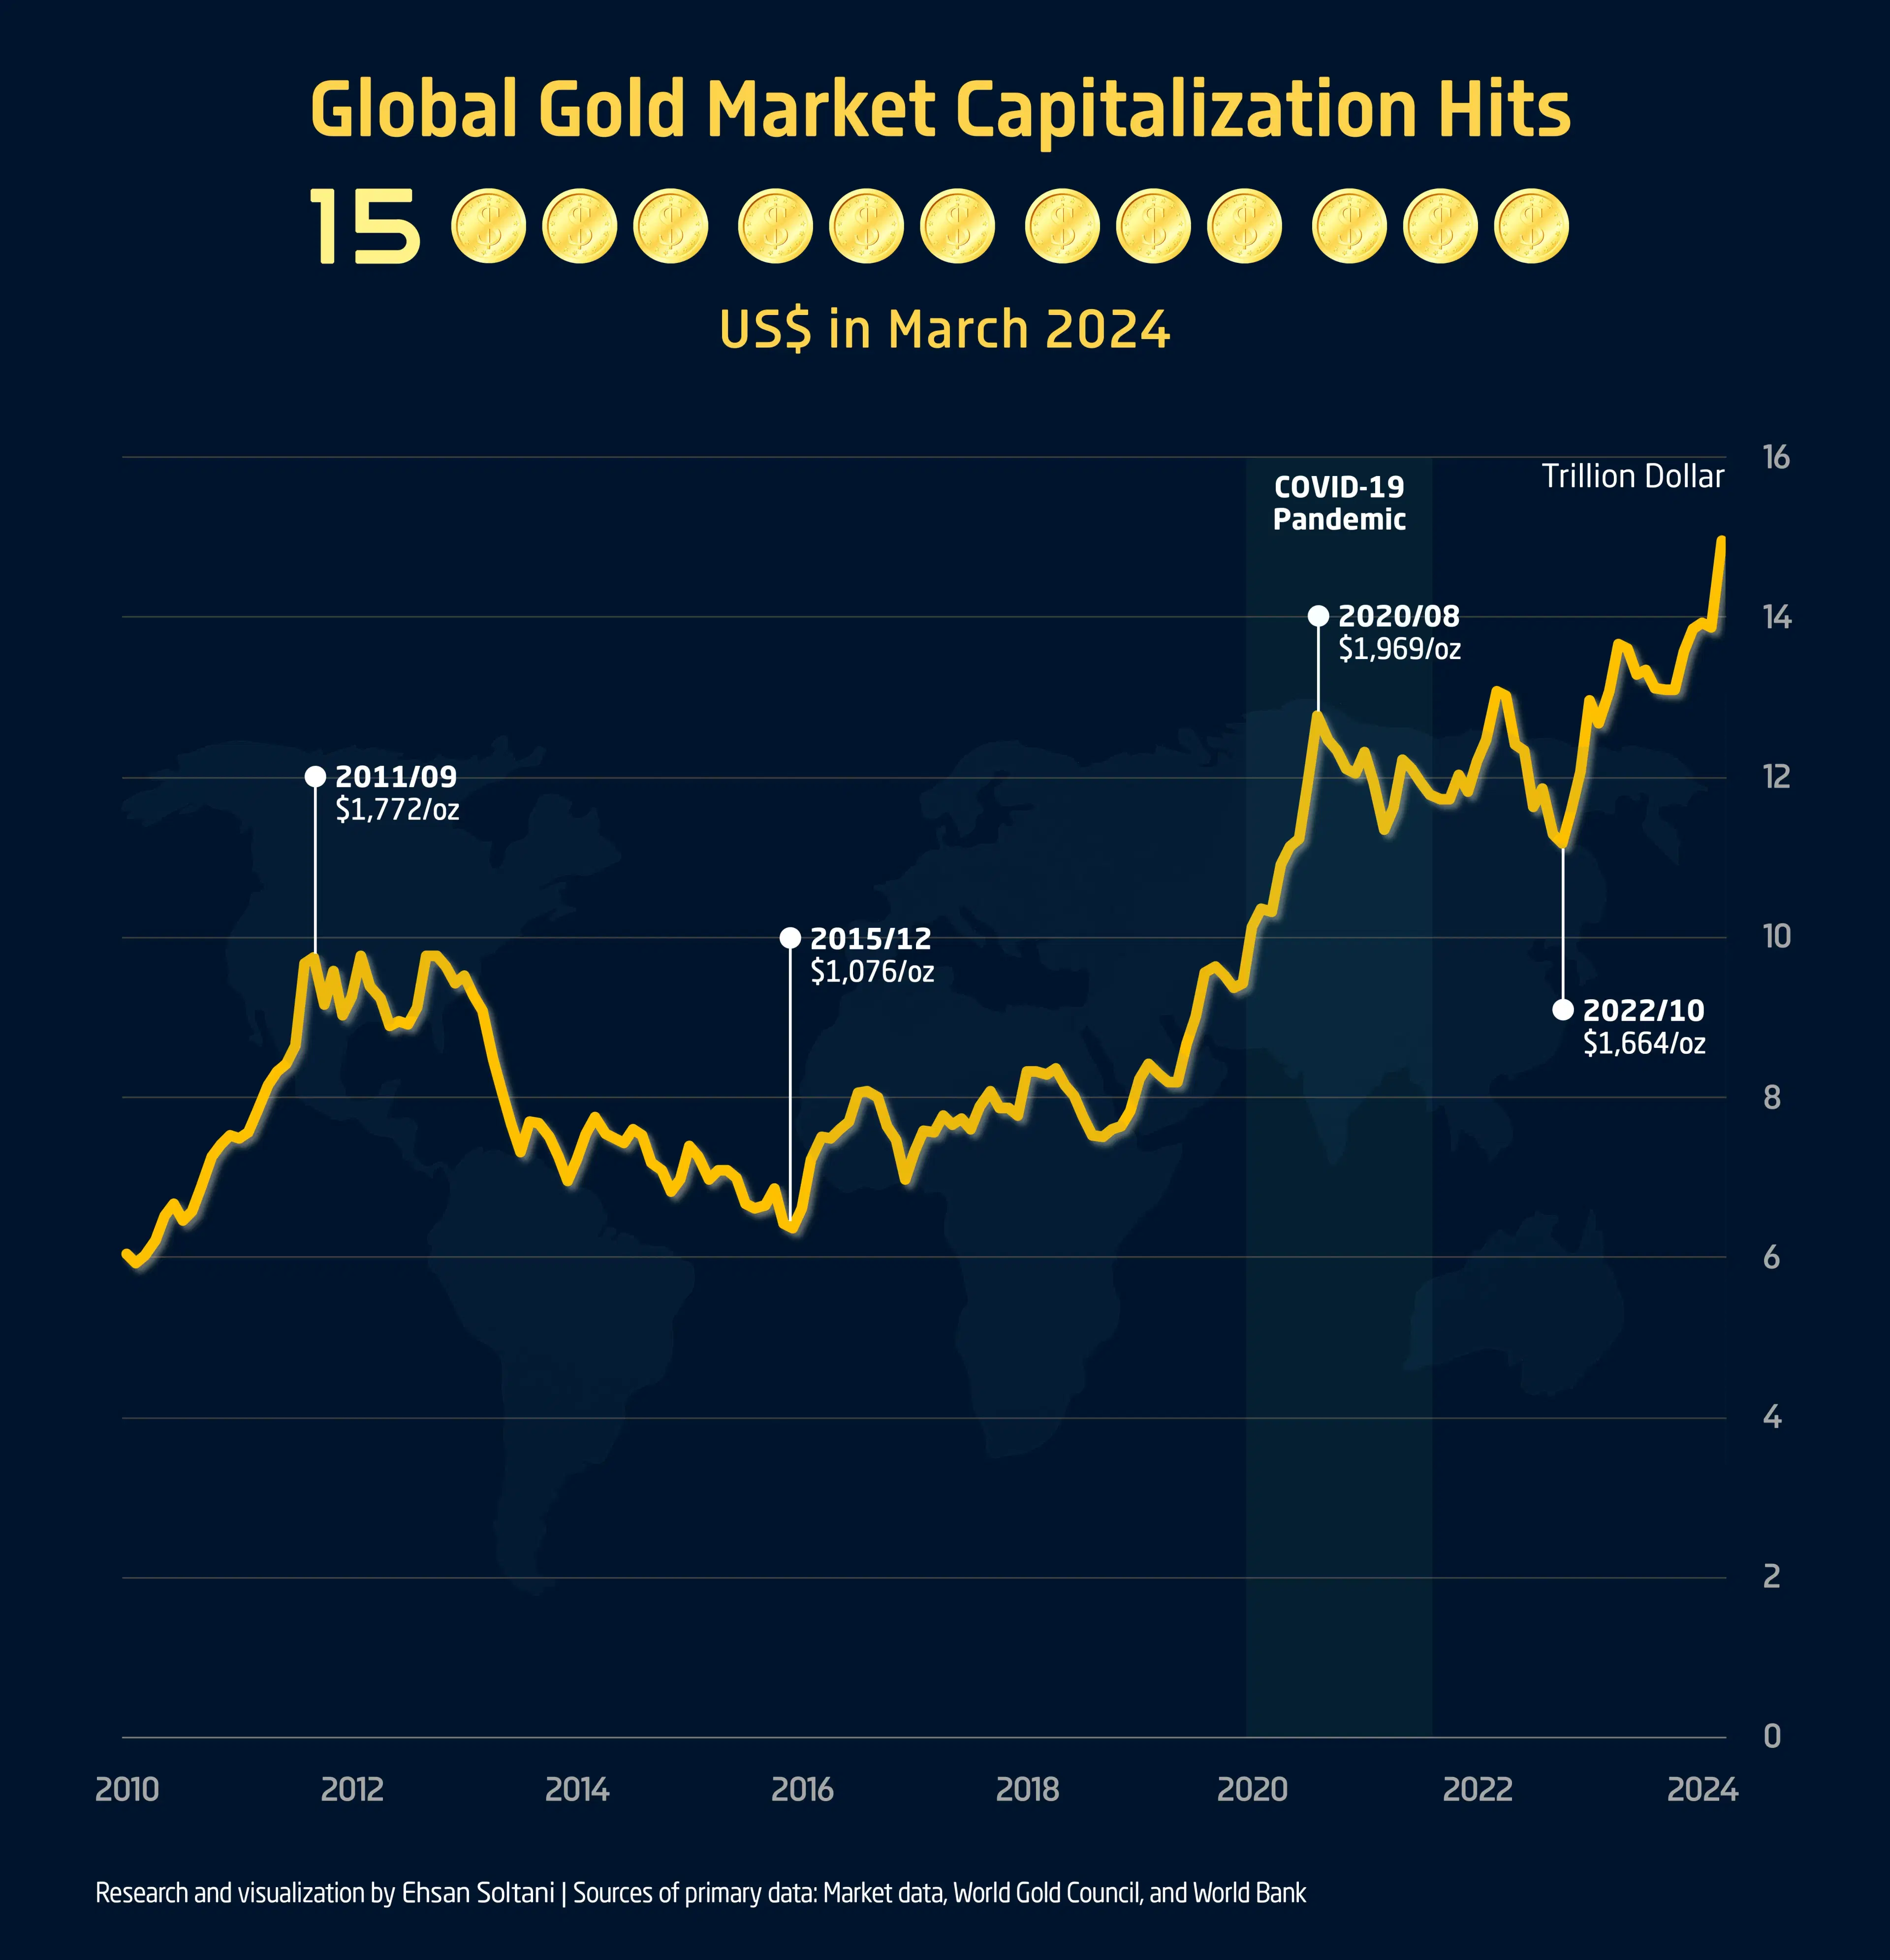 Global Gold Market Capitalization Hits US$ 15 Trillion in March 2024